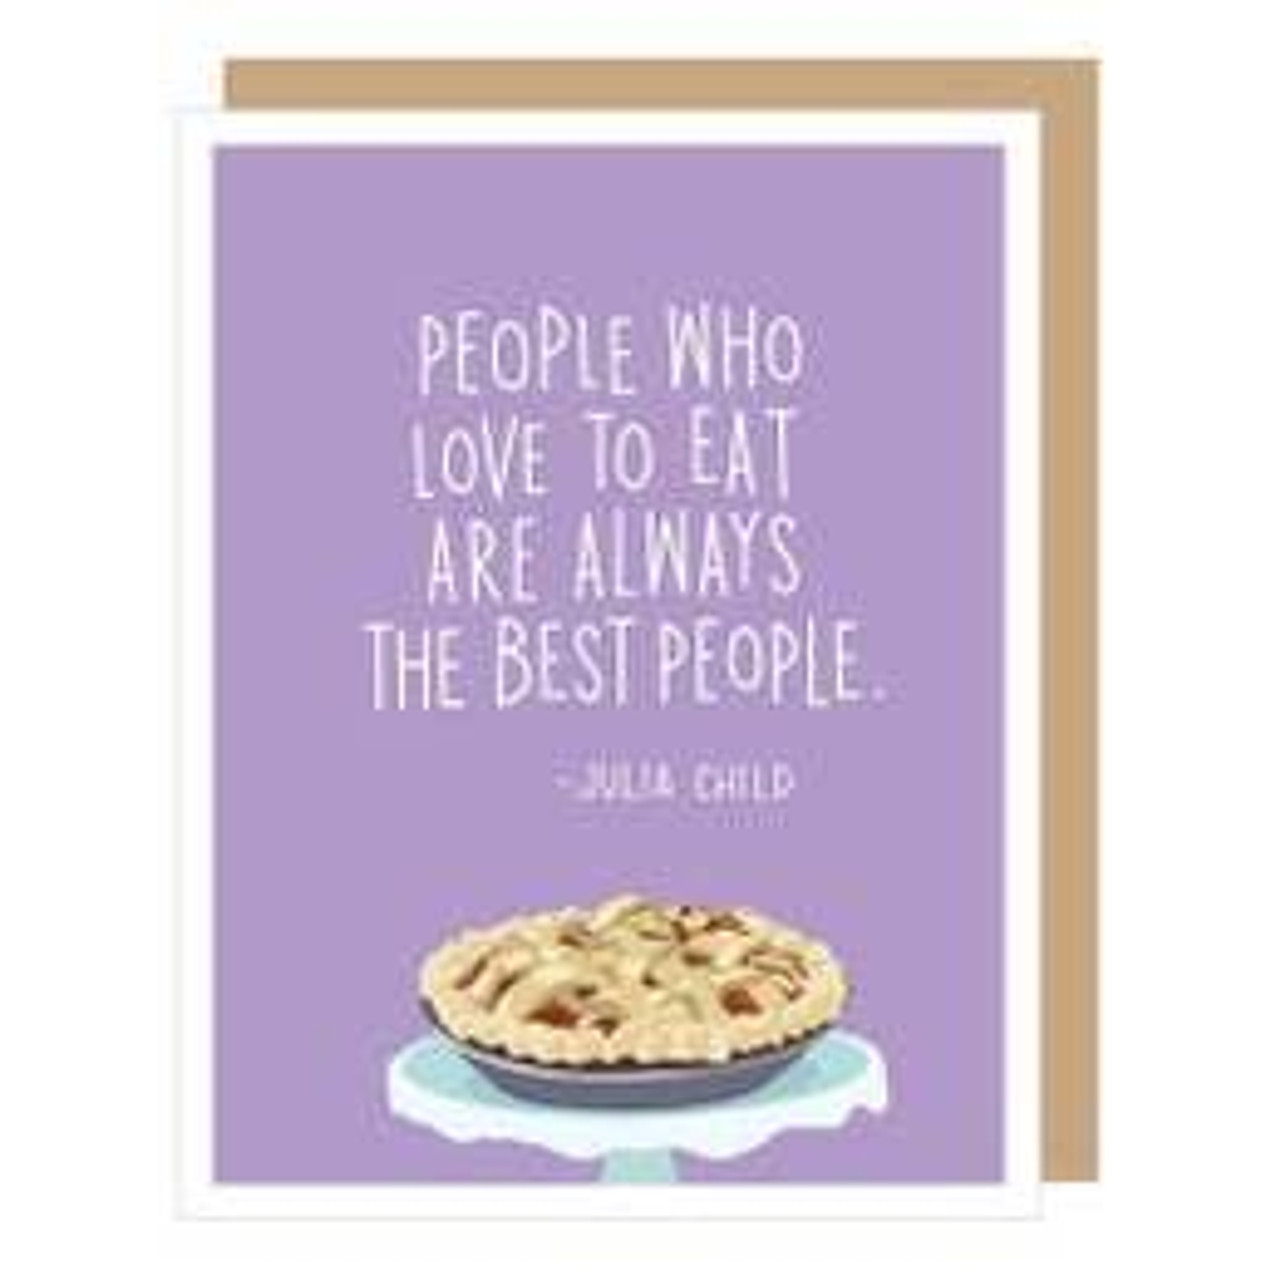 julia child quotes people who love to eat